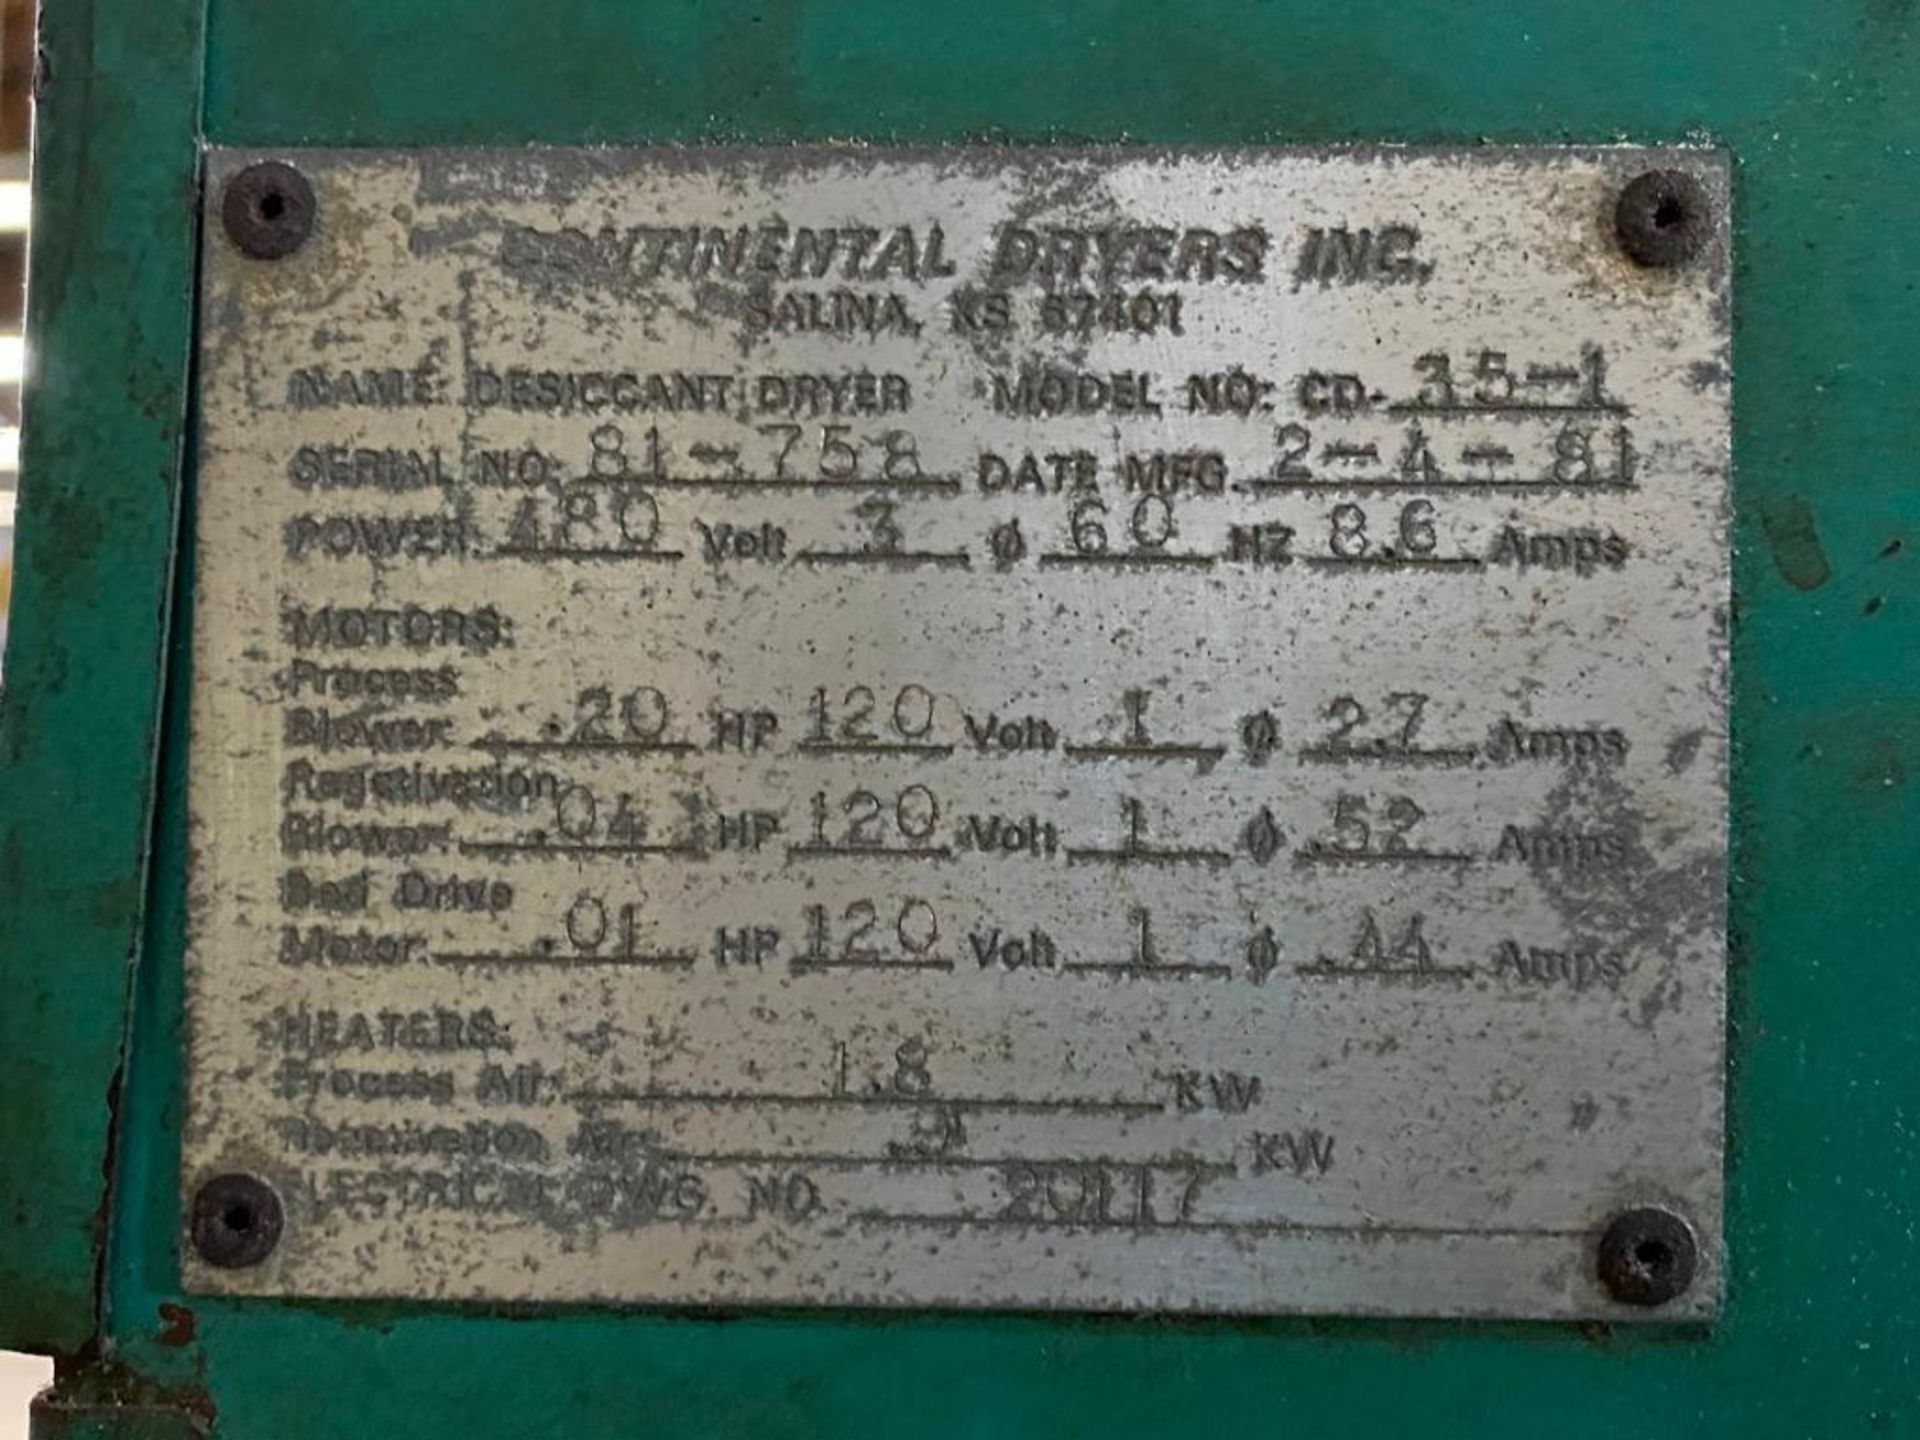 Continental mdl. 35-1 Dryer - Image 6 of 6